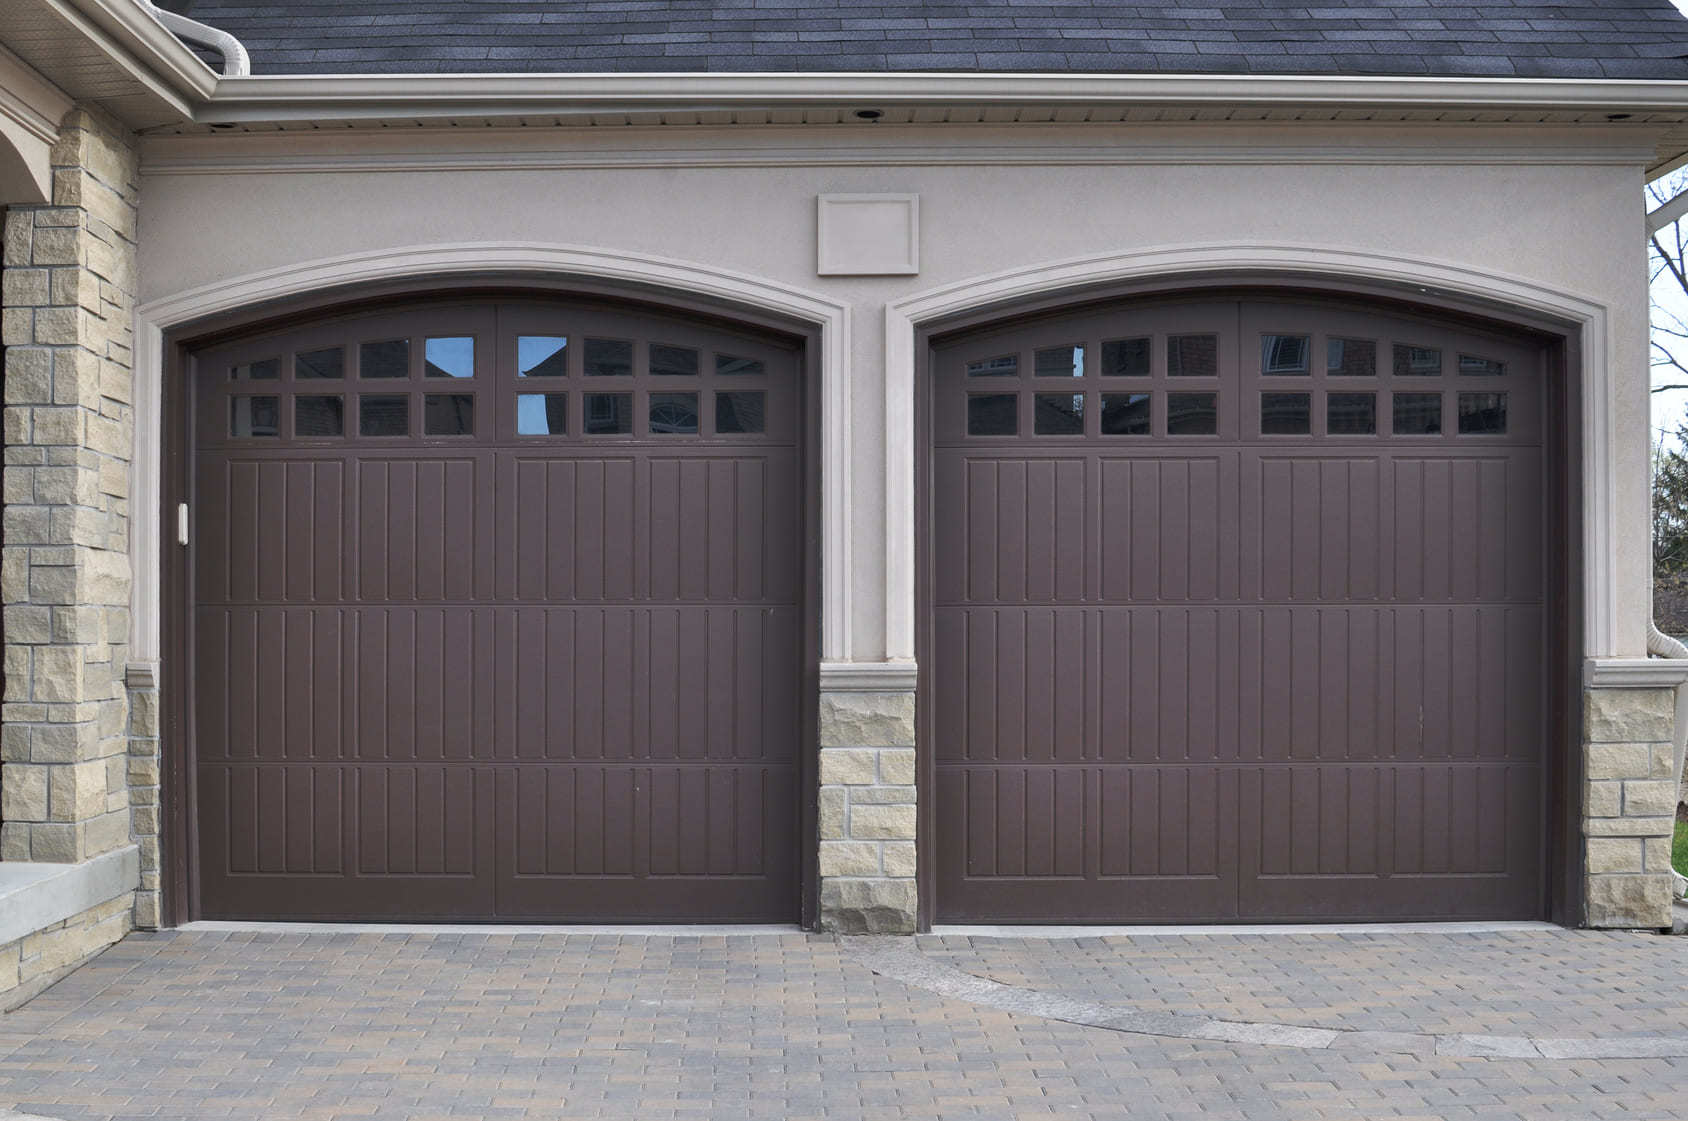 Double garage doors at a home typical of homes for sale in Ajax, Ontario